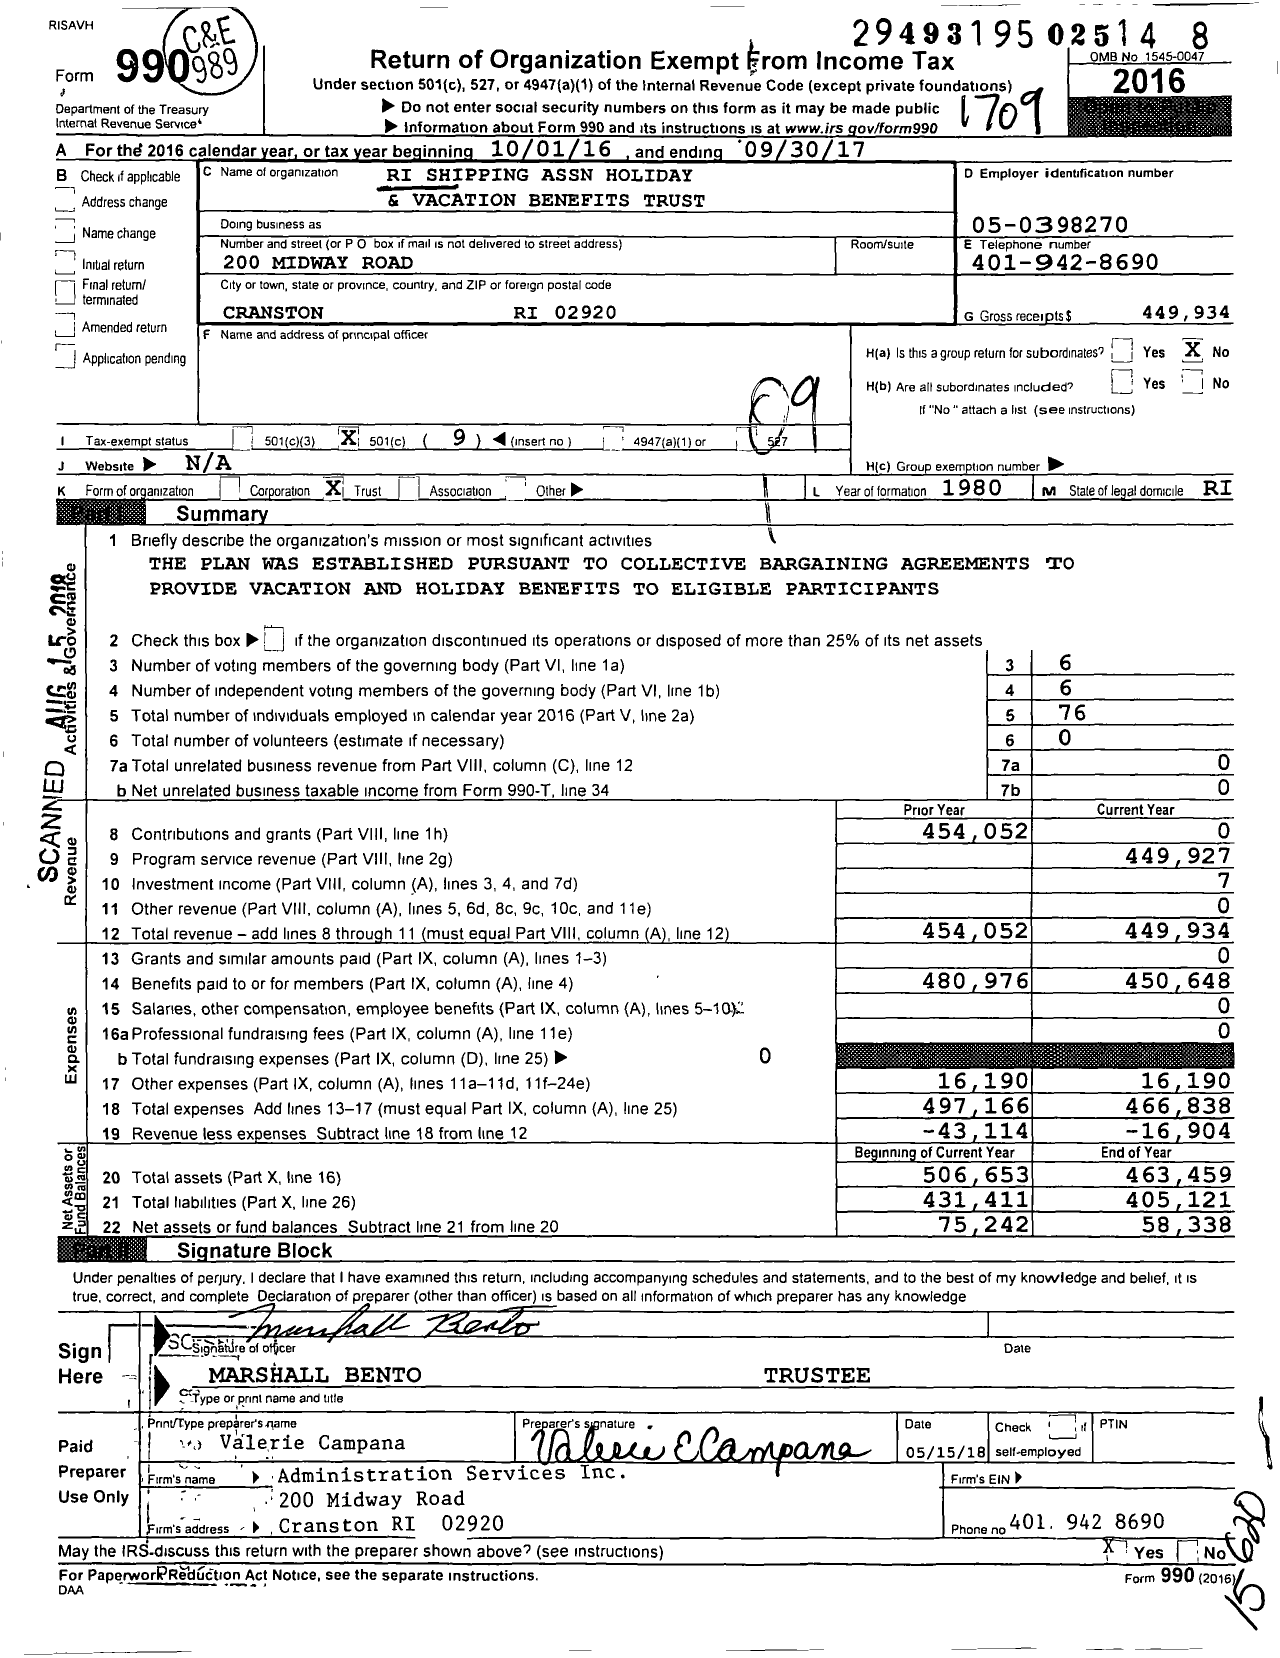 Image of first page of 2016 Form 990O for Ri Shipping Association Holiday and Vacation Benefits Trust